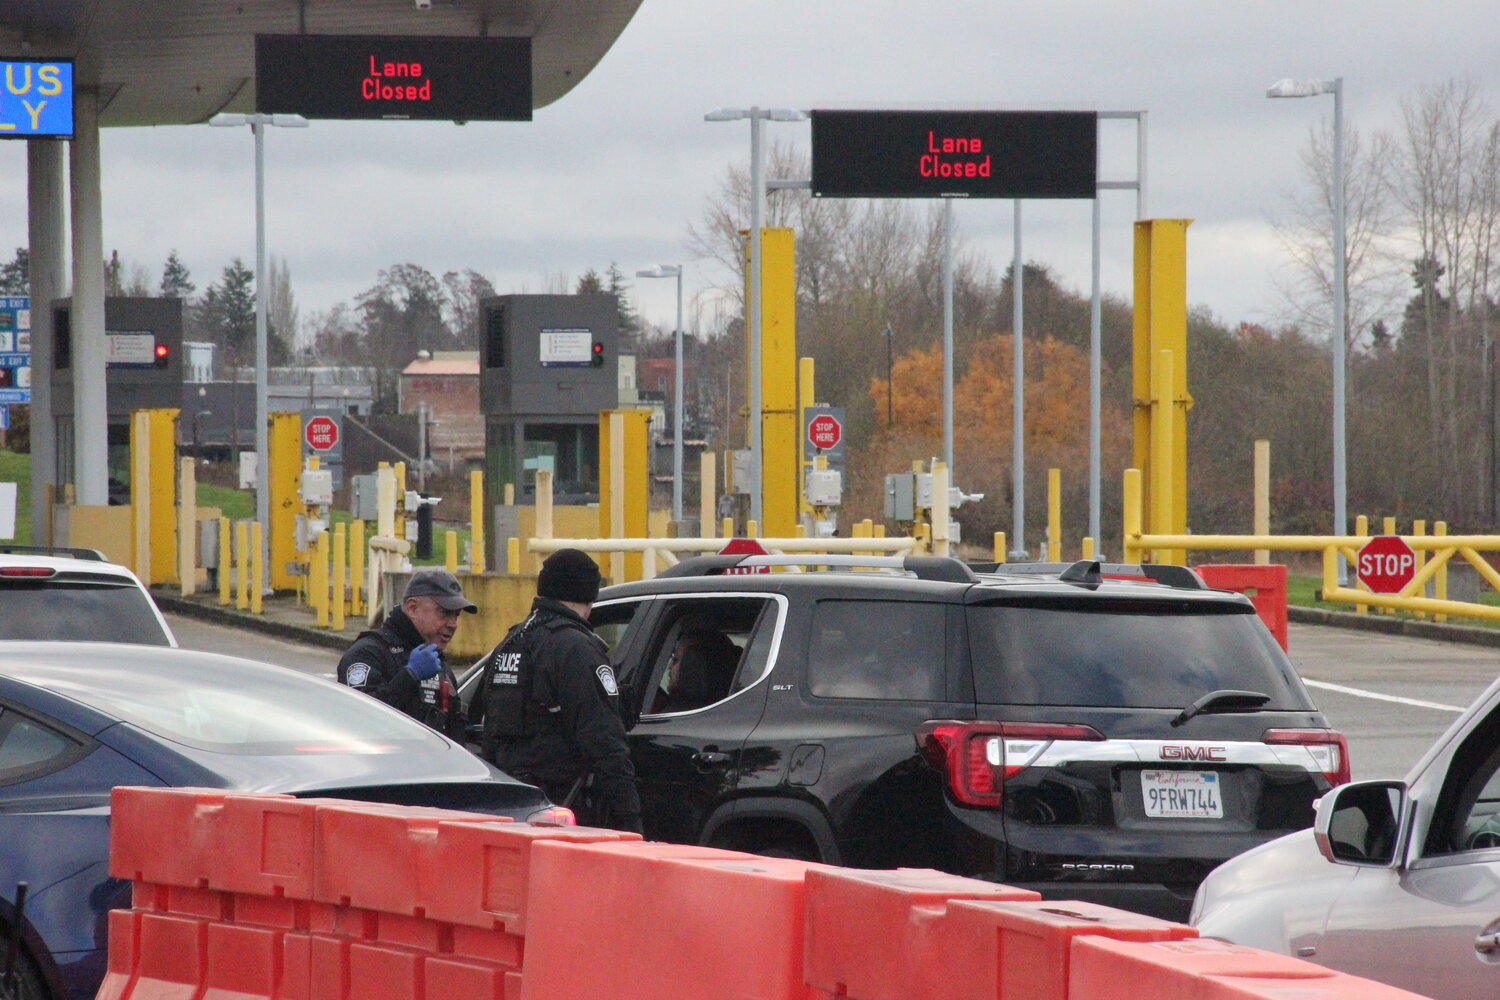 U.S. Customs and Border Protection officers surveilled vehicles entering the U.S. through the Peace Arch port of entry on November 22 in what appears to be additional security following a deadly car explosion at the Rainbow Bridge border crossing in Niagara Falls.